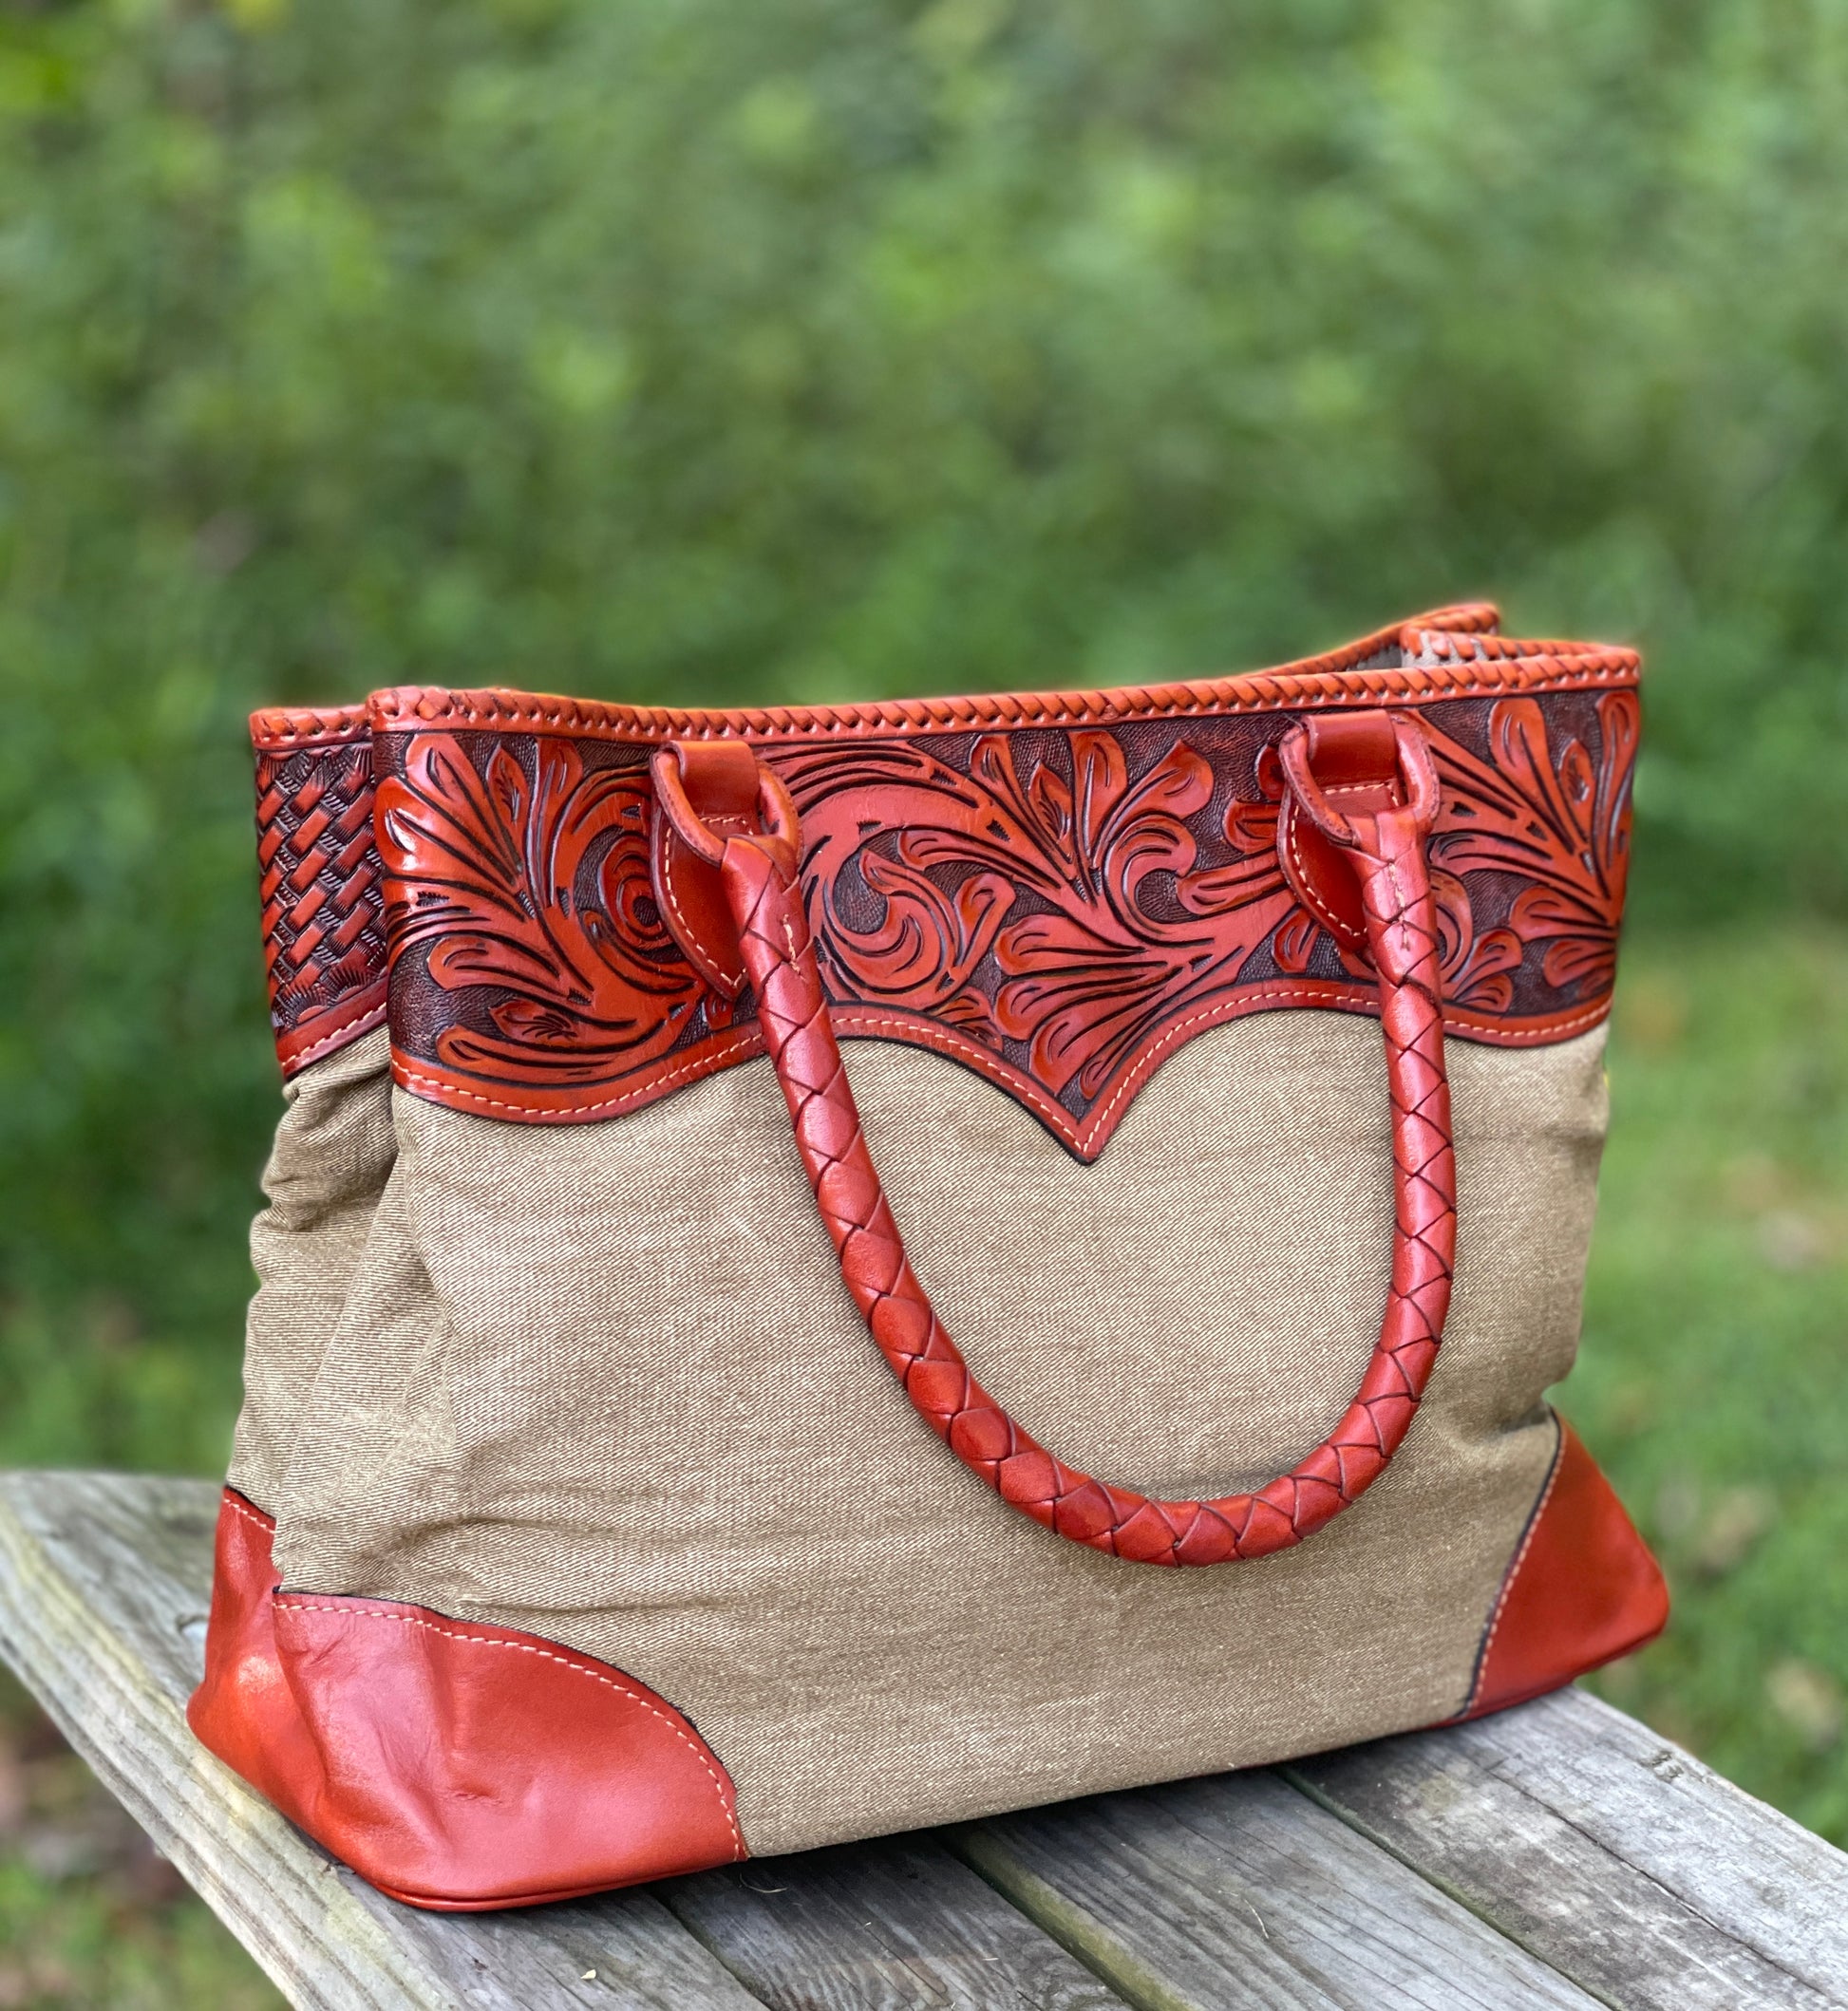 Hand-Tooled Leather & Denim Tote "Denim" by ALLE more Color - ALLE Handbags